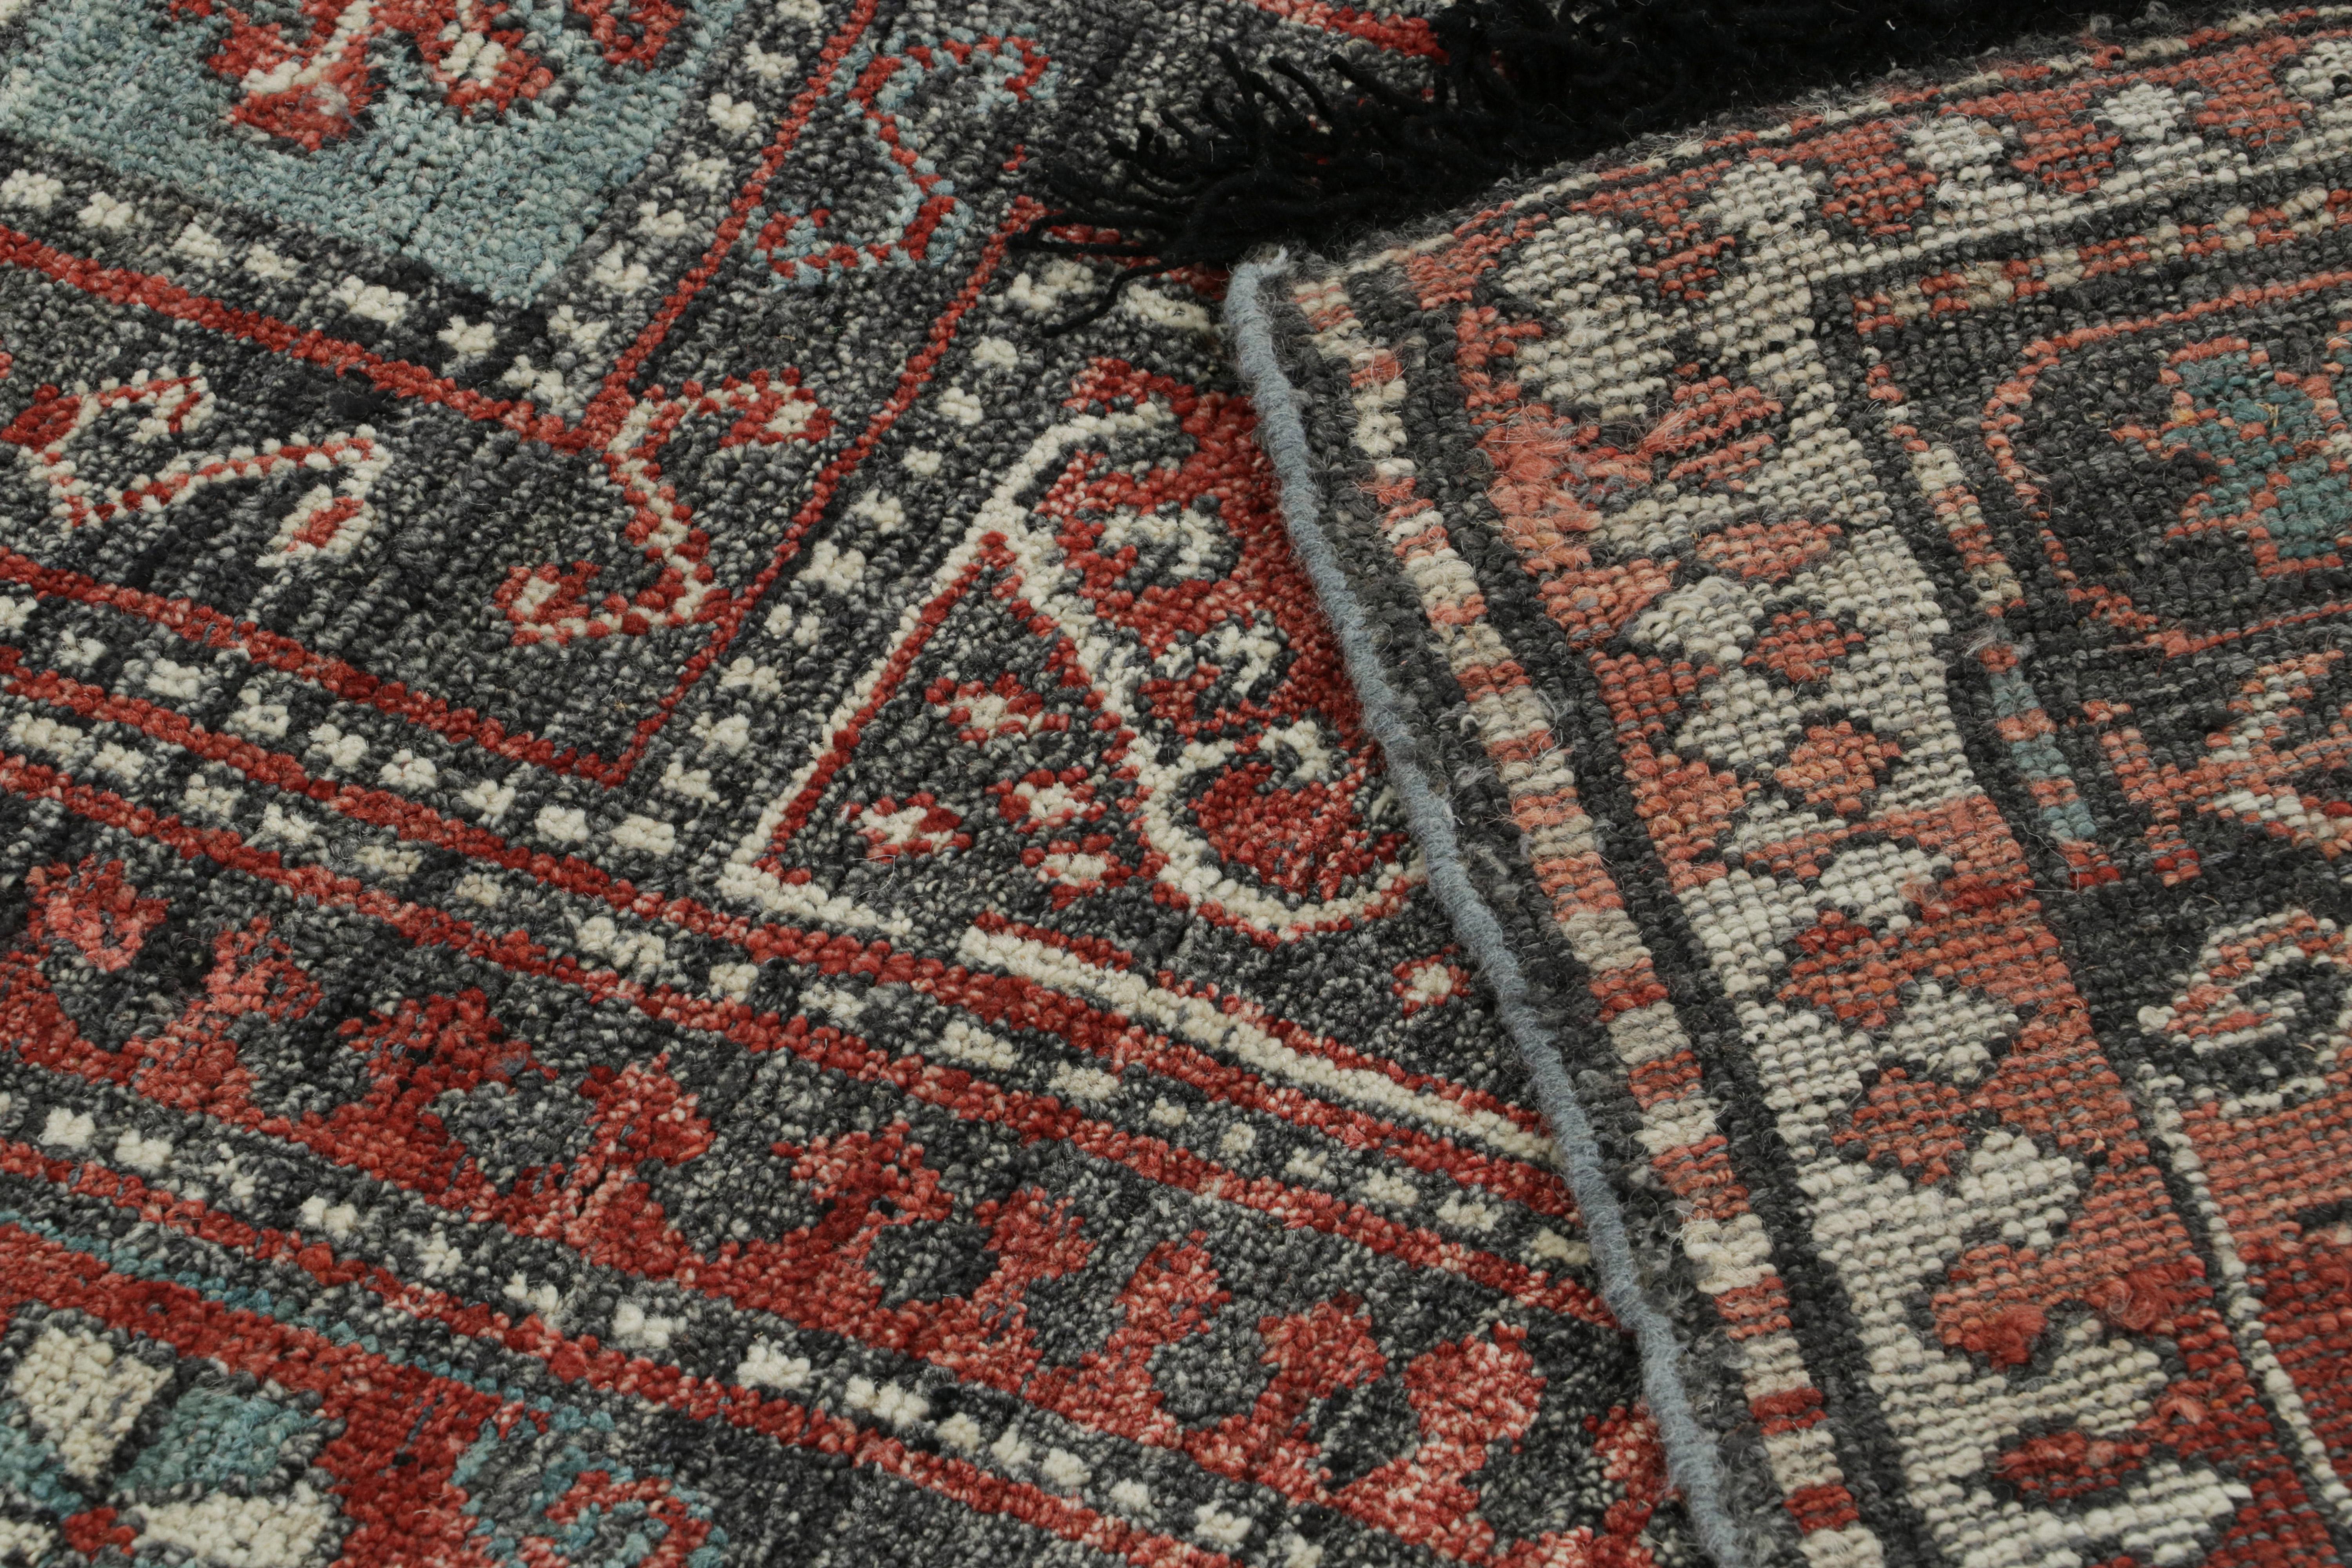 Wool Rug & Kilim’s Tribal Style Rug in Red, Blue & Black Geometric Patterns For Sale